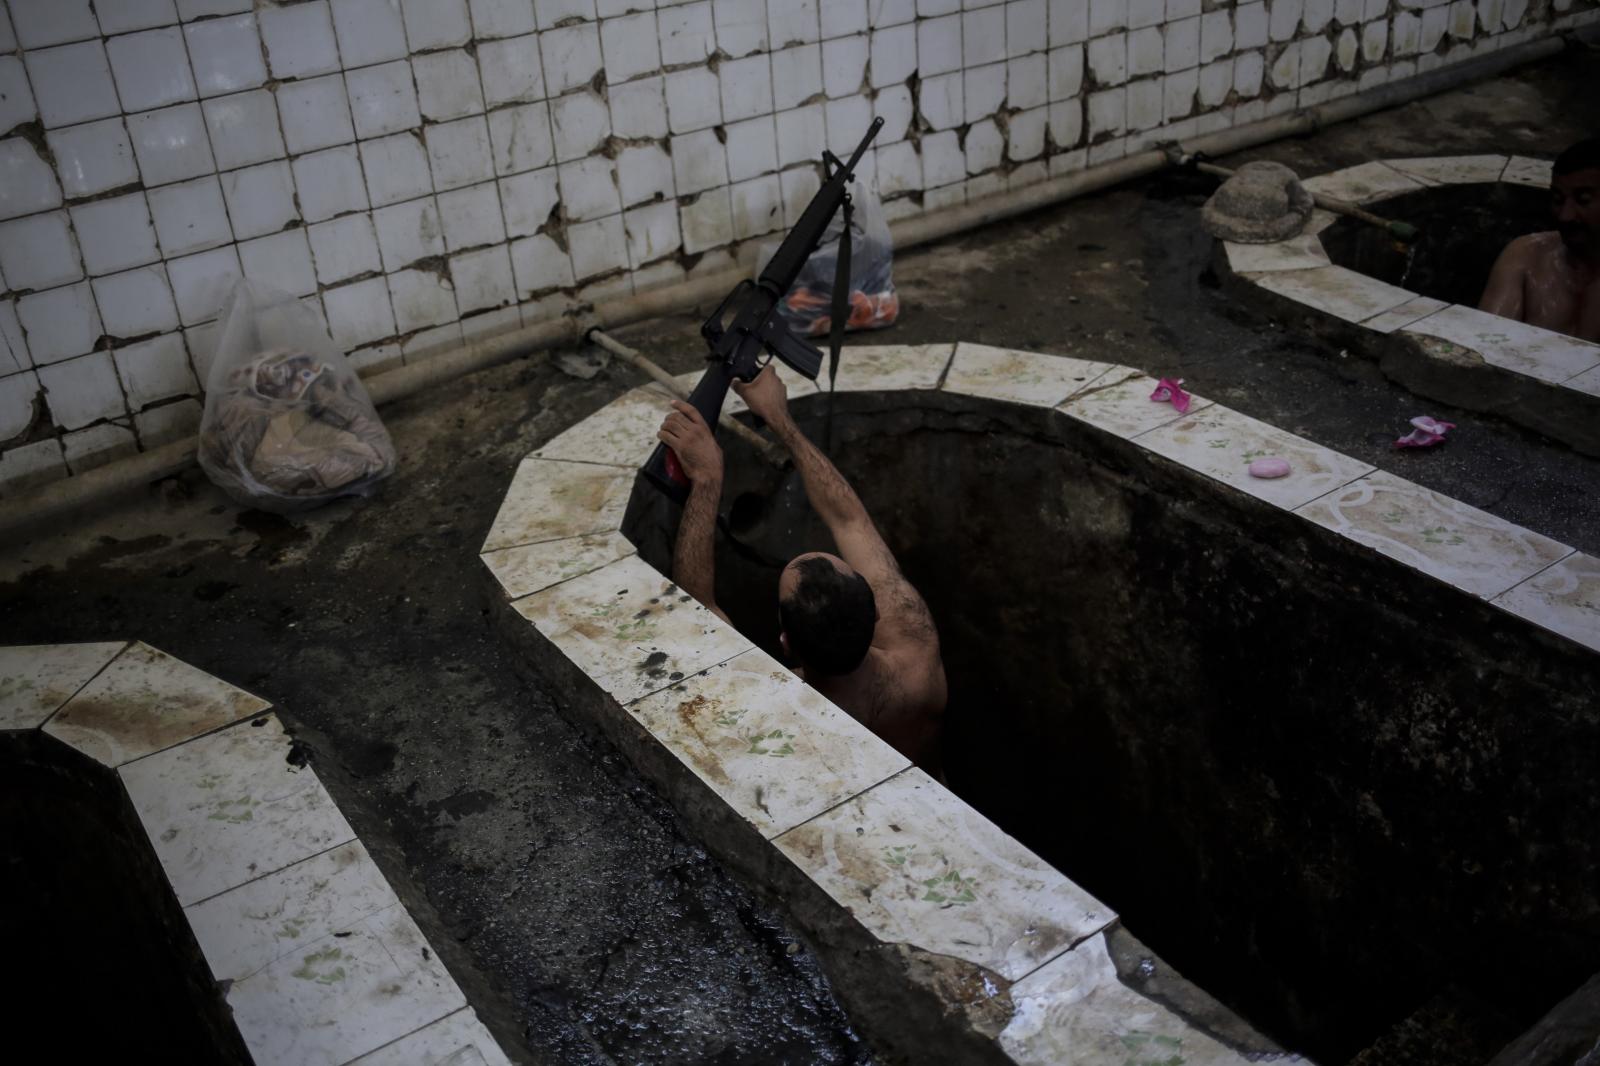 A federal police officer puts his machine gun on the edge of the bath in the Hamam Alil spa. The spa reopened several months ago after the town was liberate from the Islamic State group. Many Iraqi soldiers visit the spa, located half an hour south of Mosul, in between fighting against the Islamic State group for relaxation.&nbsp;